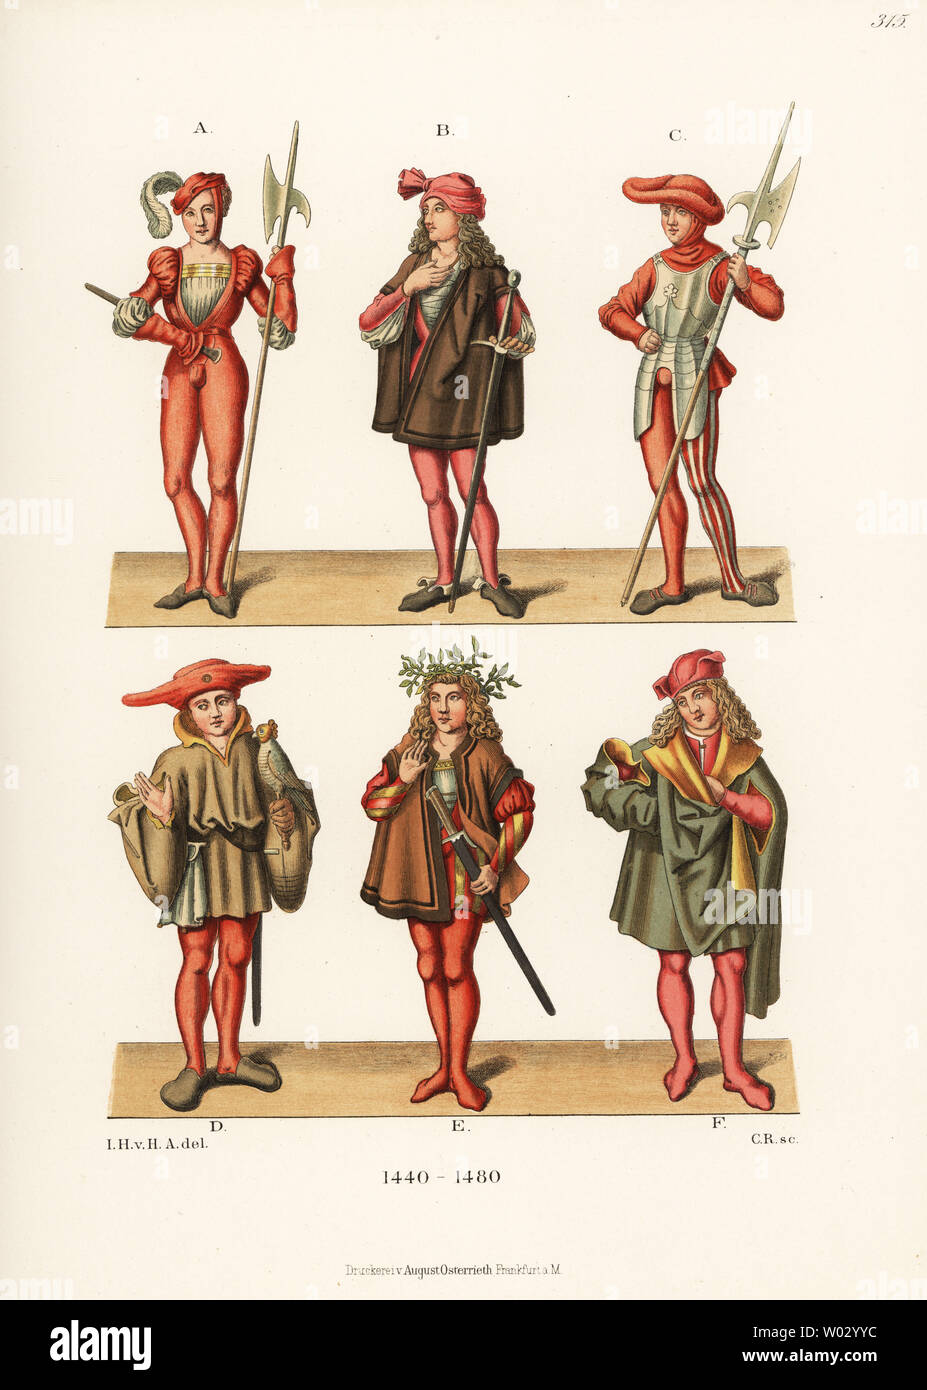 German men’s costumes of the 15th century. Young pikeman or Lansknecht with sword and halberd A, soldier with felt hat C, hunter with falcon and glove D, and young men in house clothes B,E,F. From the Duke of Saxony’s lineage book in Dresden State Archive. Chromolithograph from Hefner-Alteneck's Costumes, Artworks and Appliances from the Middle Ages to the 17th Century, Frankfurt, 1889. Illustration by Dr. Jakob Heinrich von Hefner-Alteneck, lithographed by C.R. Dr. Hefner-Alteneck (1811 - 1903) was a German museum curator, archaeologist, art historian, illustrator and etcher. Stock Photo